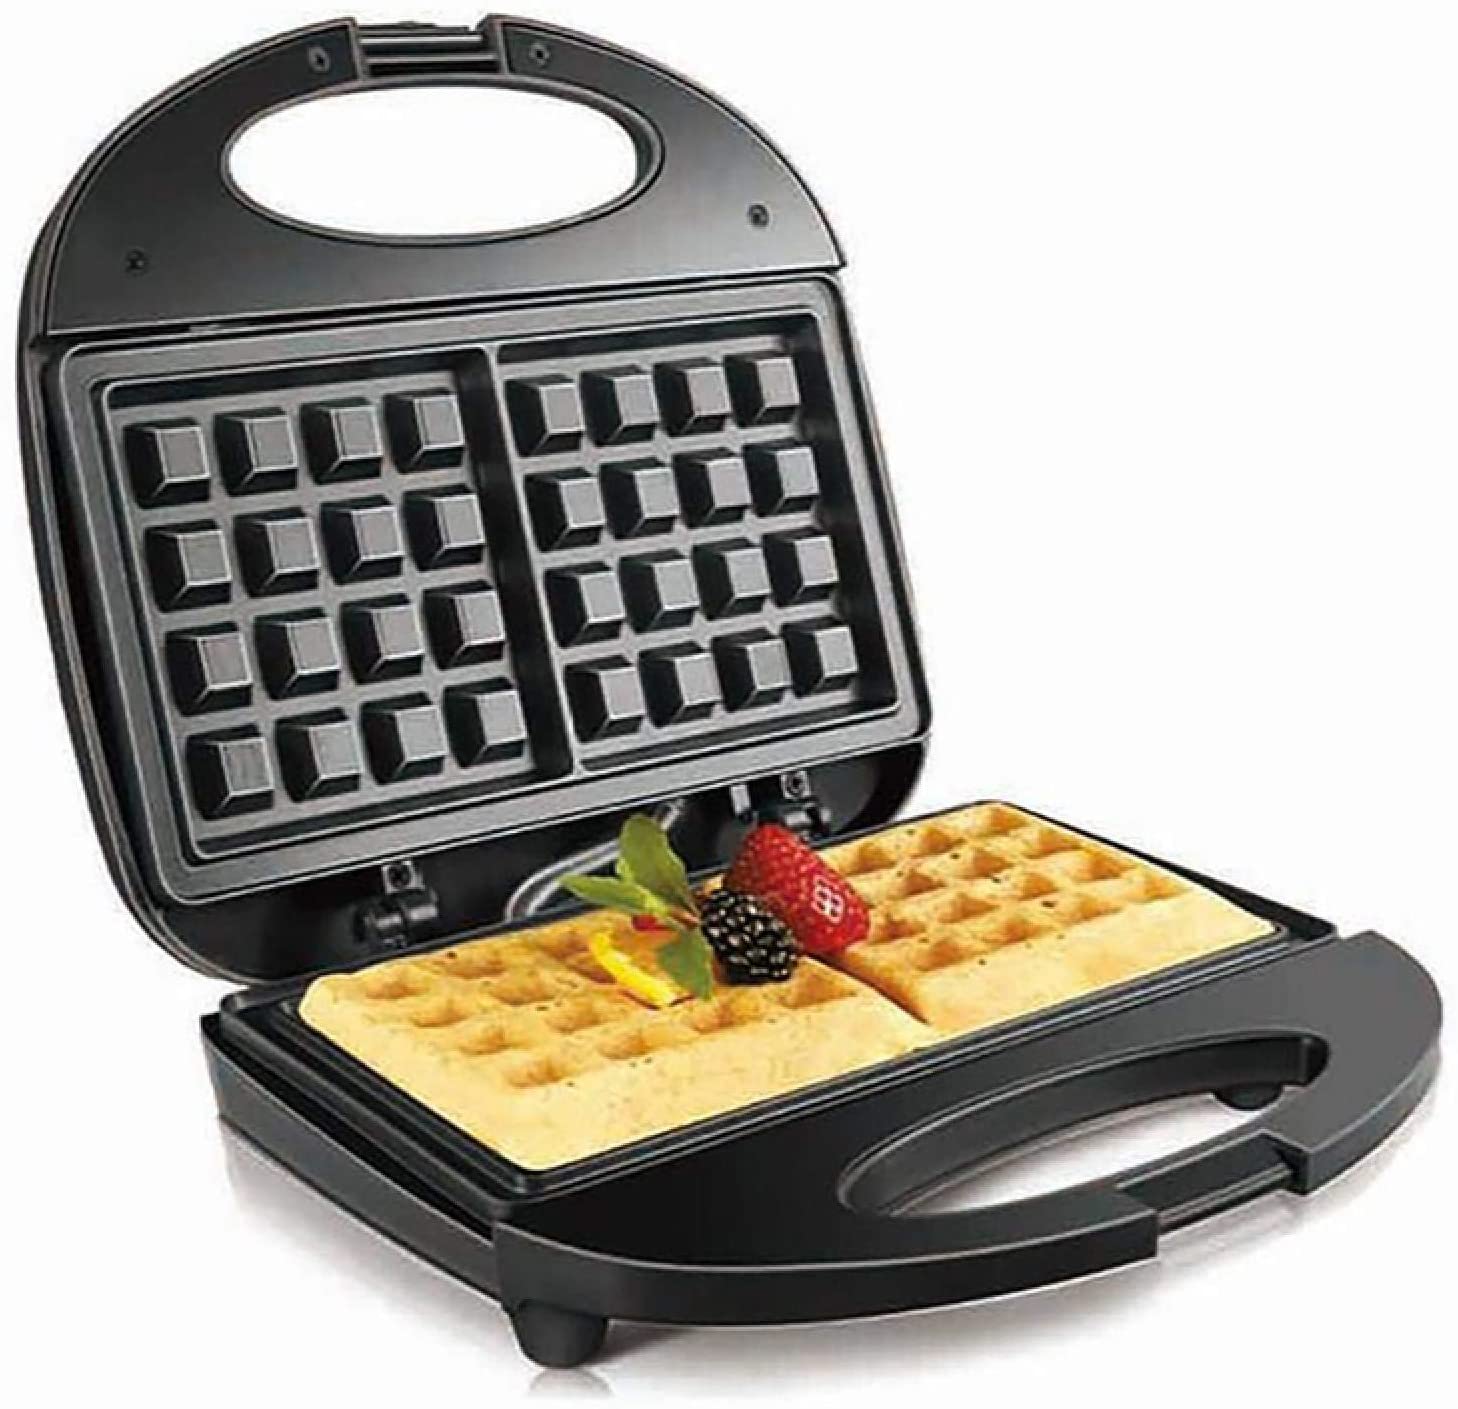 Is it true that waffle irons are waterproof?